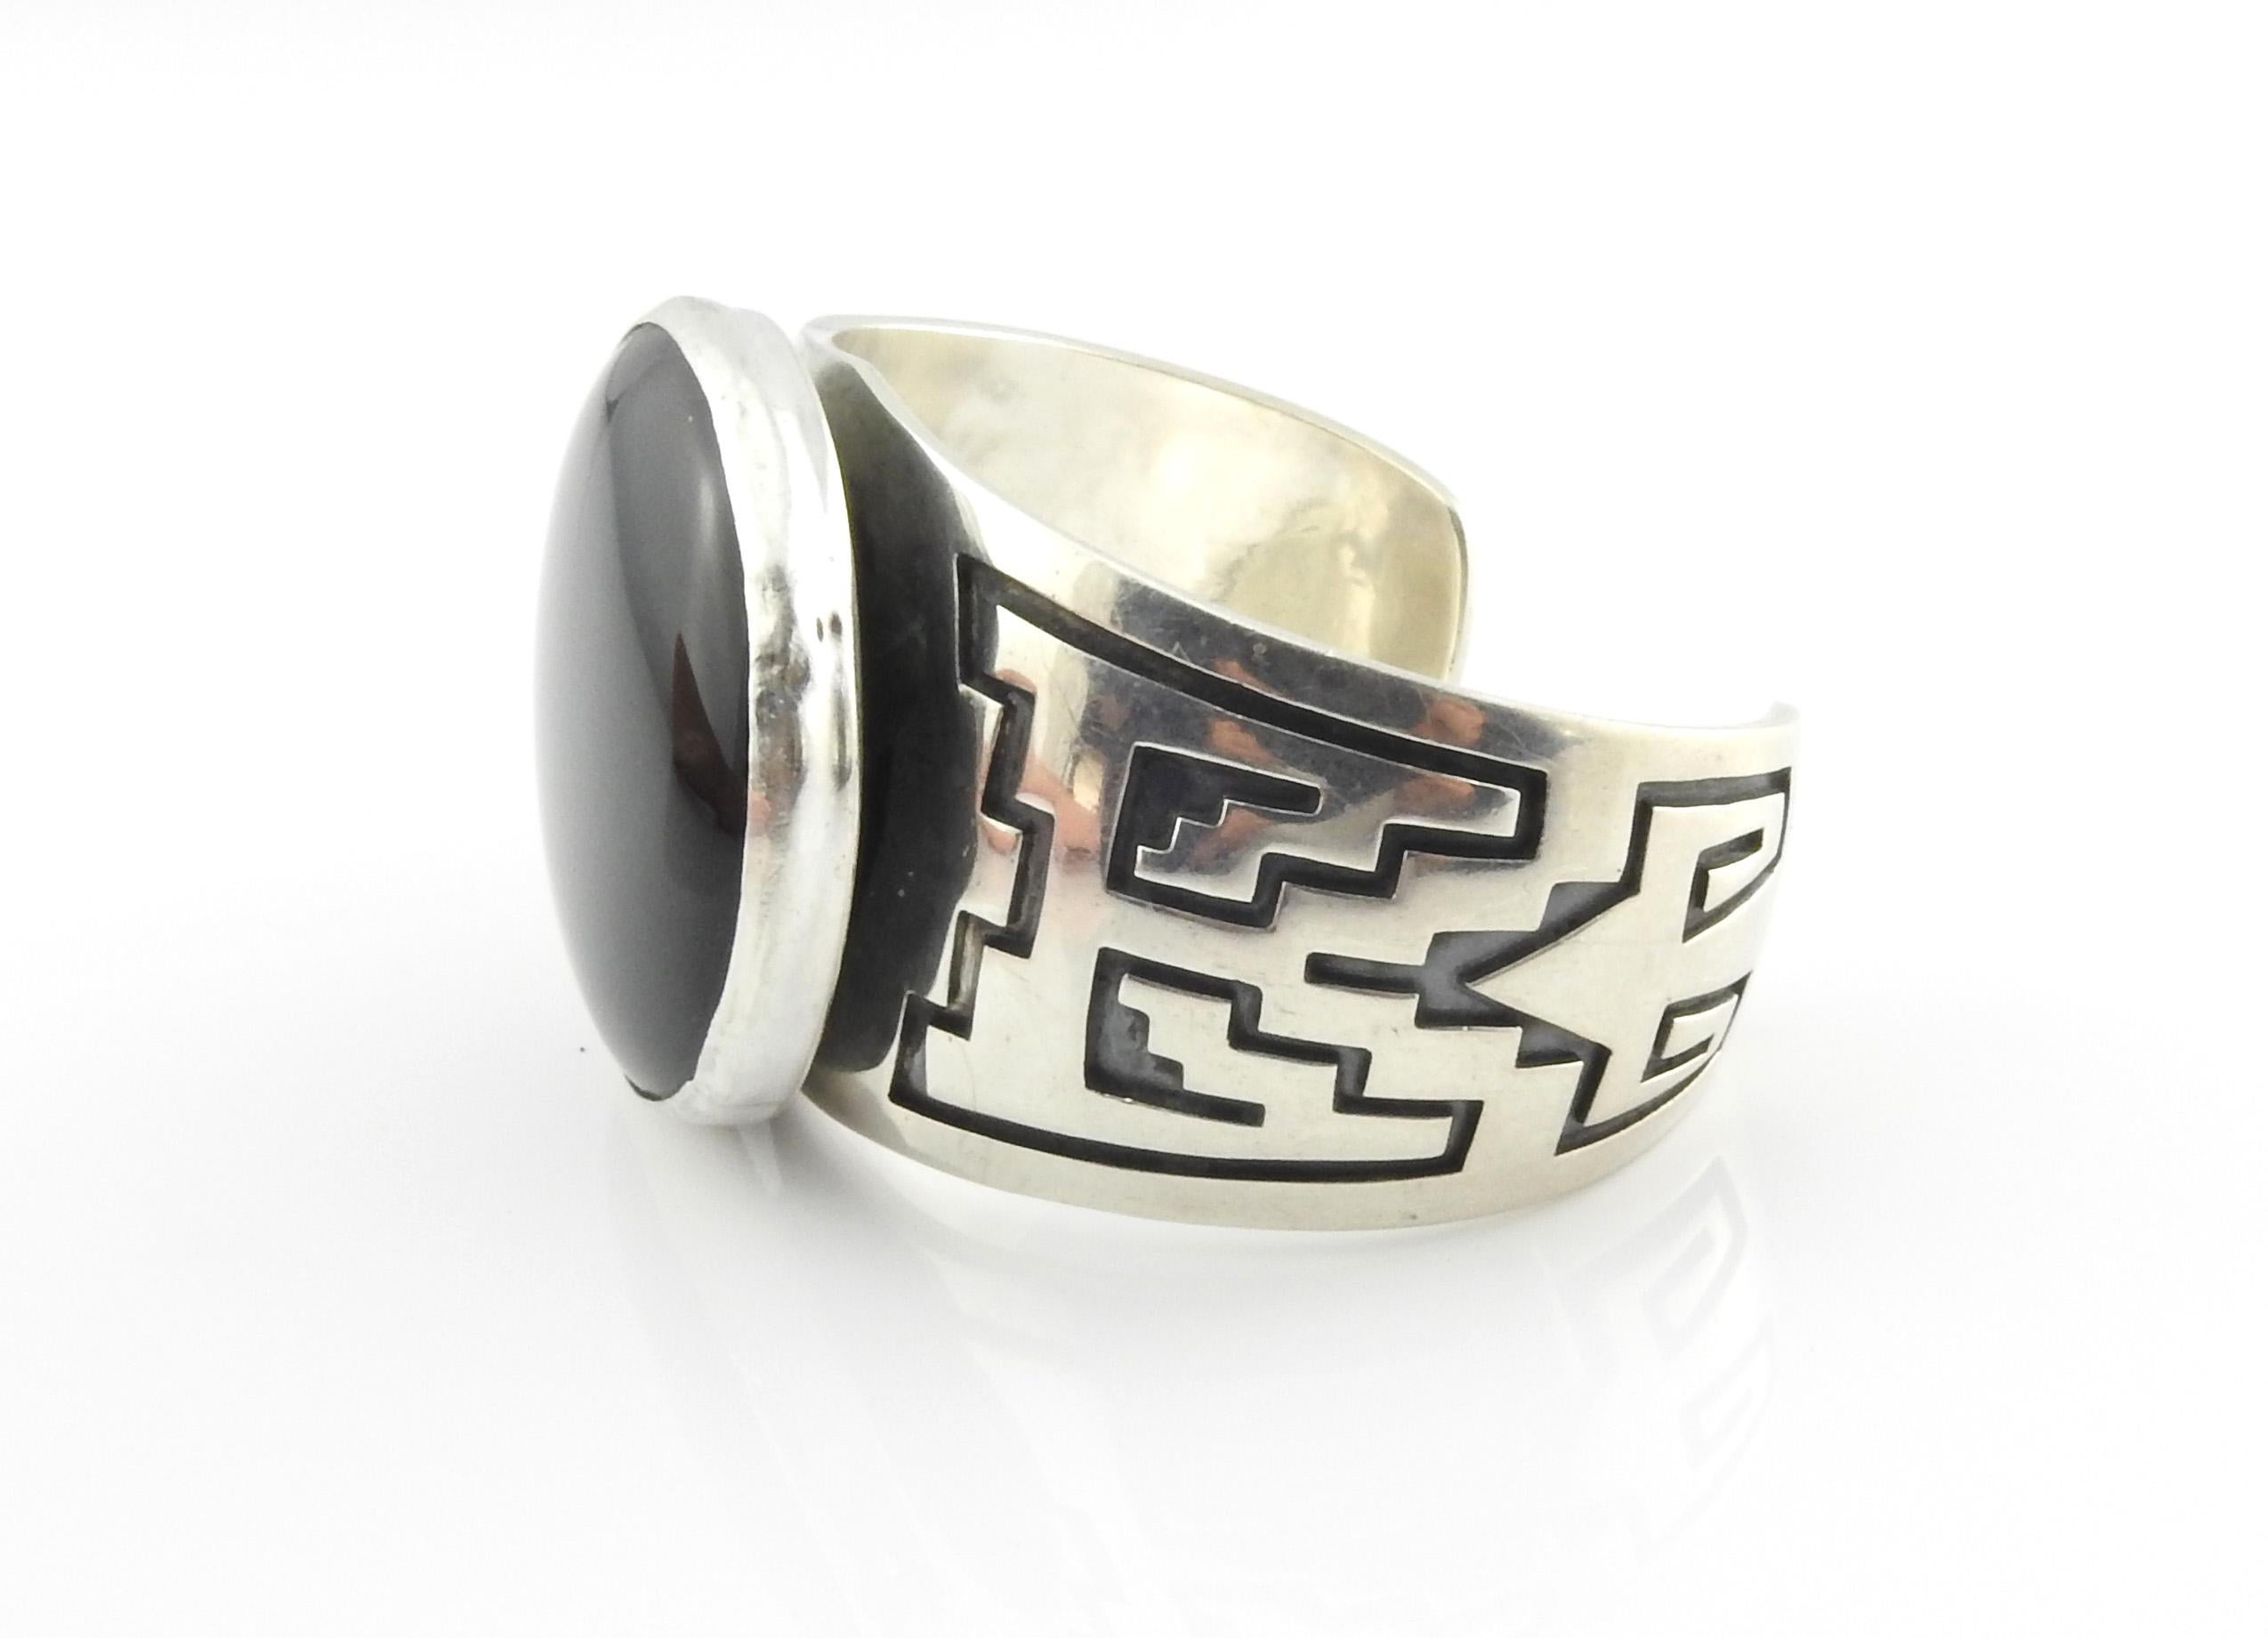 Native American Navajo Everett and Mary Teller stamped sterling silver and black onyx cuff bracelet.

Marked: EMT in fish design mark, Sterling

Measures: 5 1/4